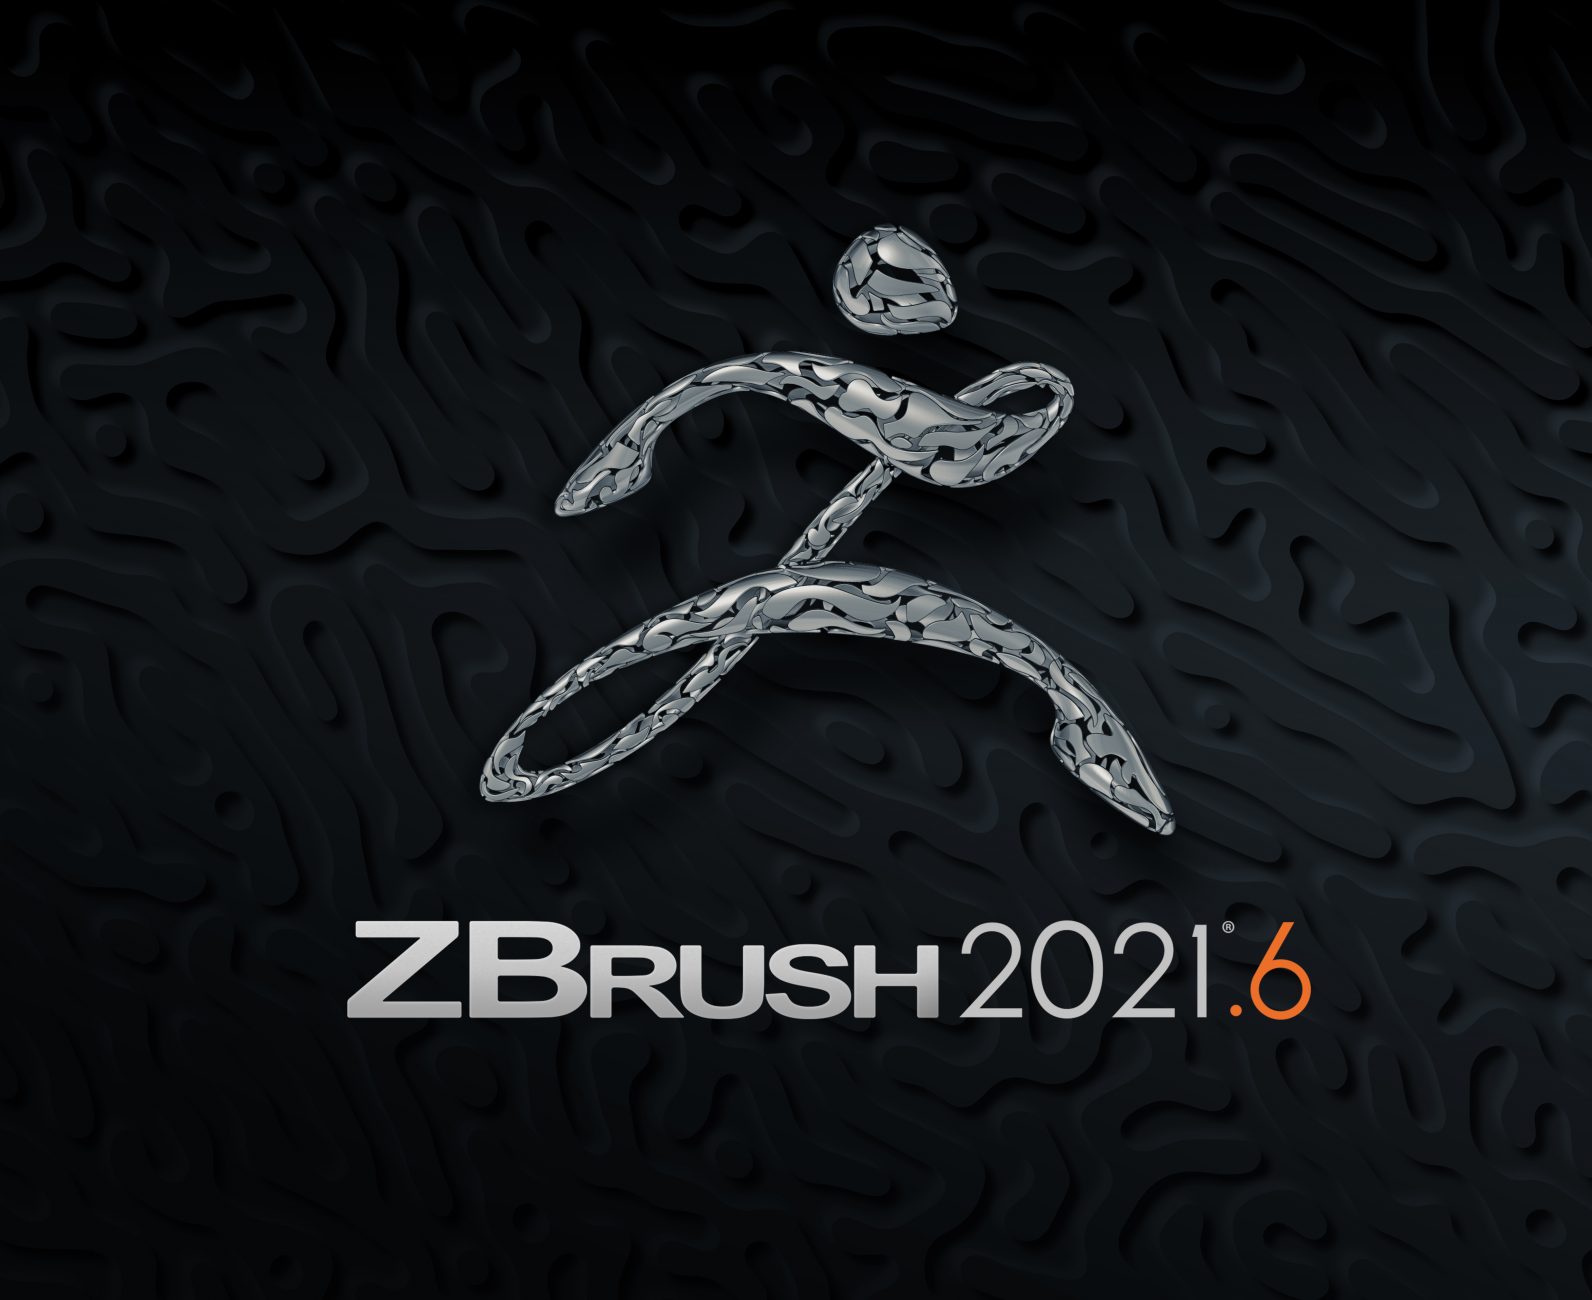 zbrush 2021.6 release date